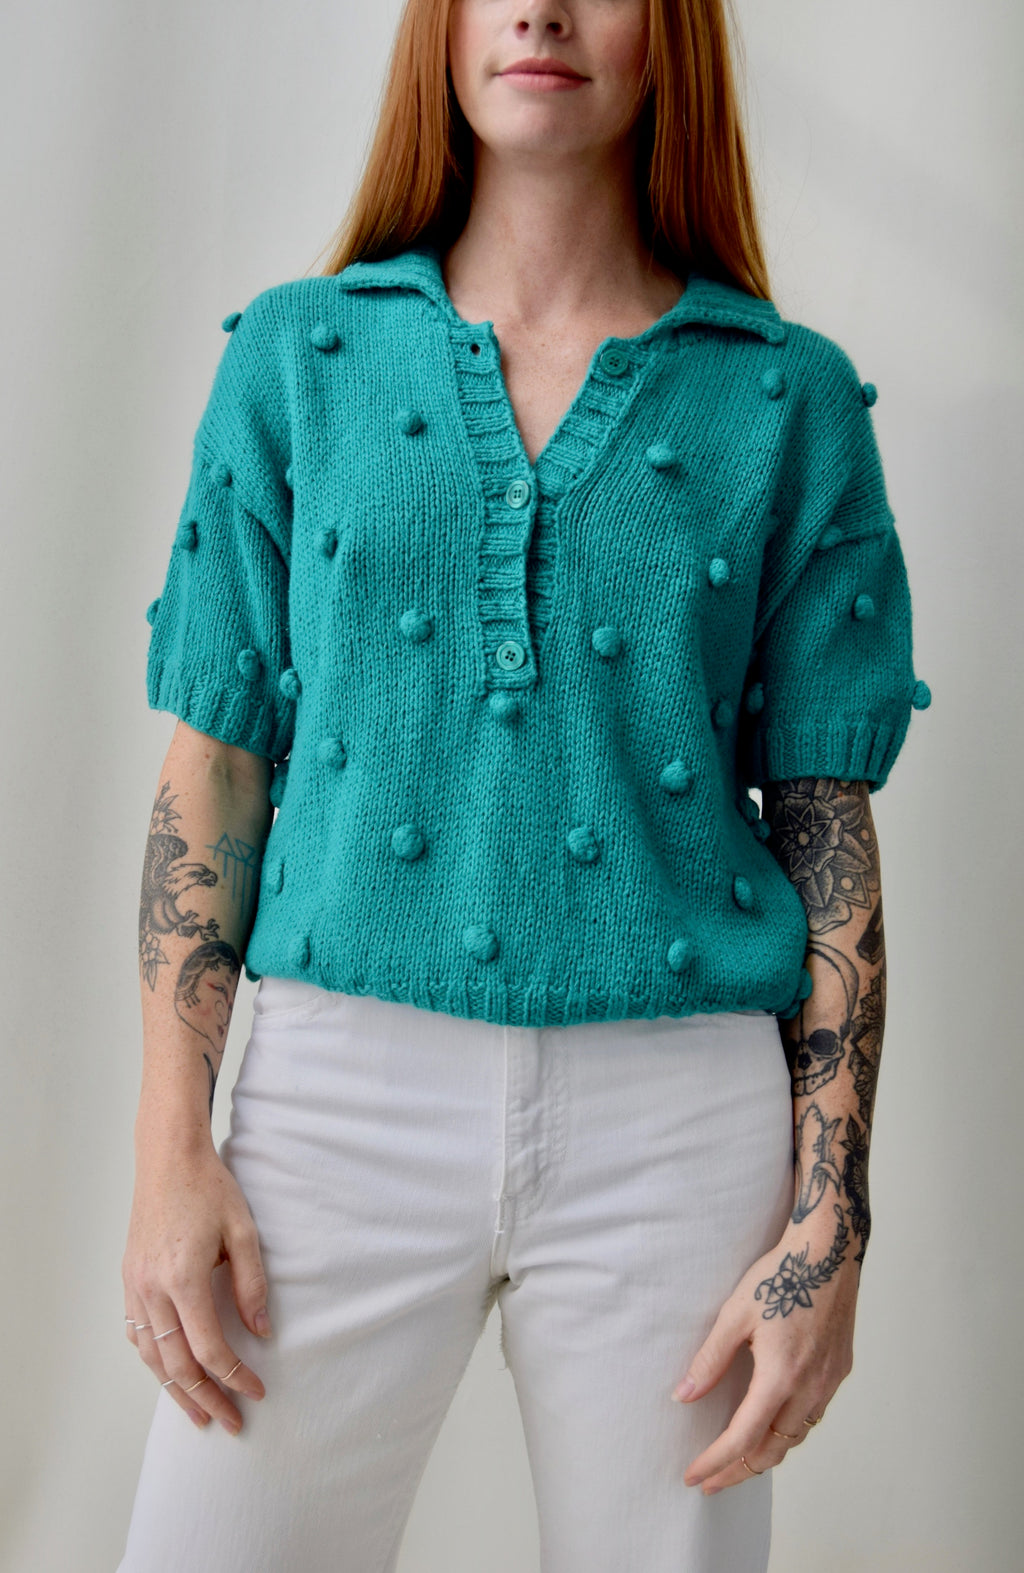 Teal Bobble Knit Top